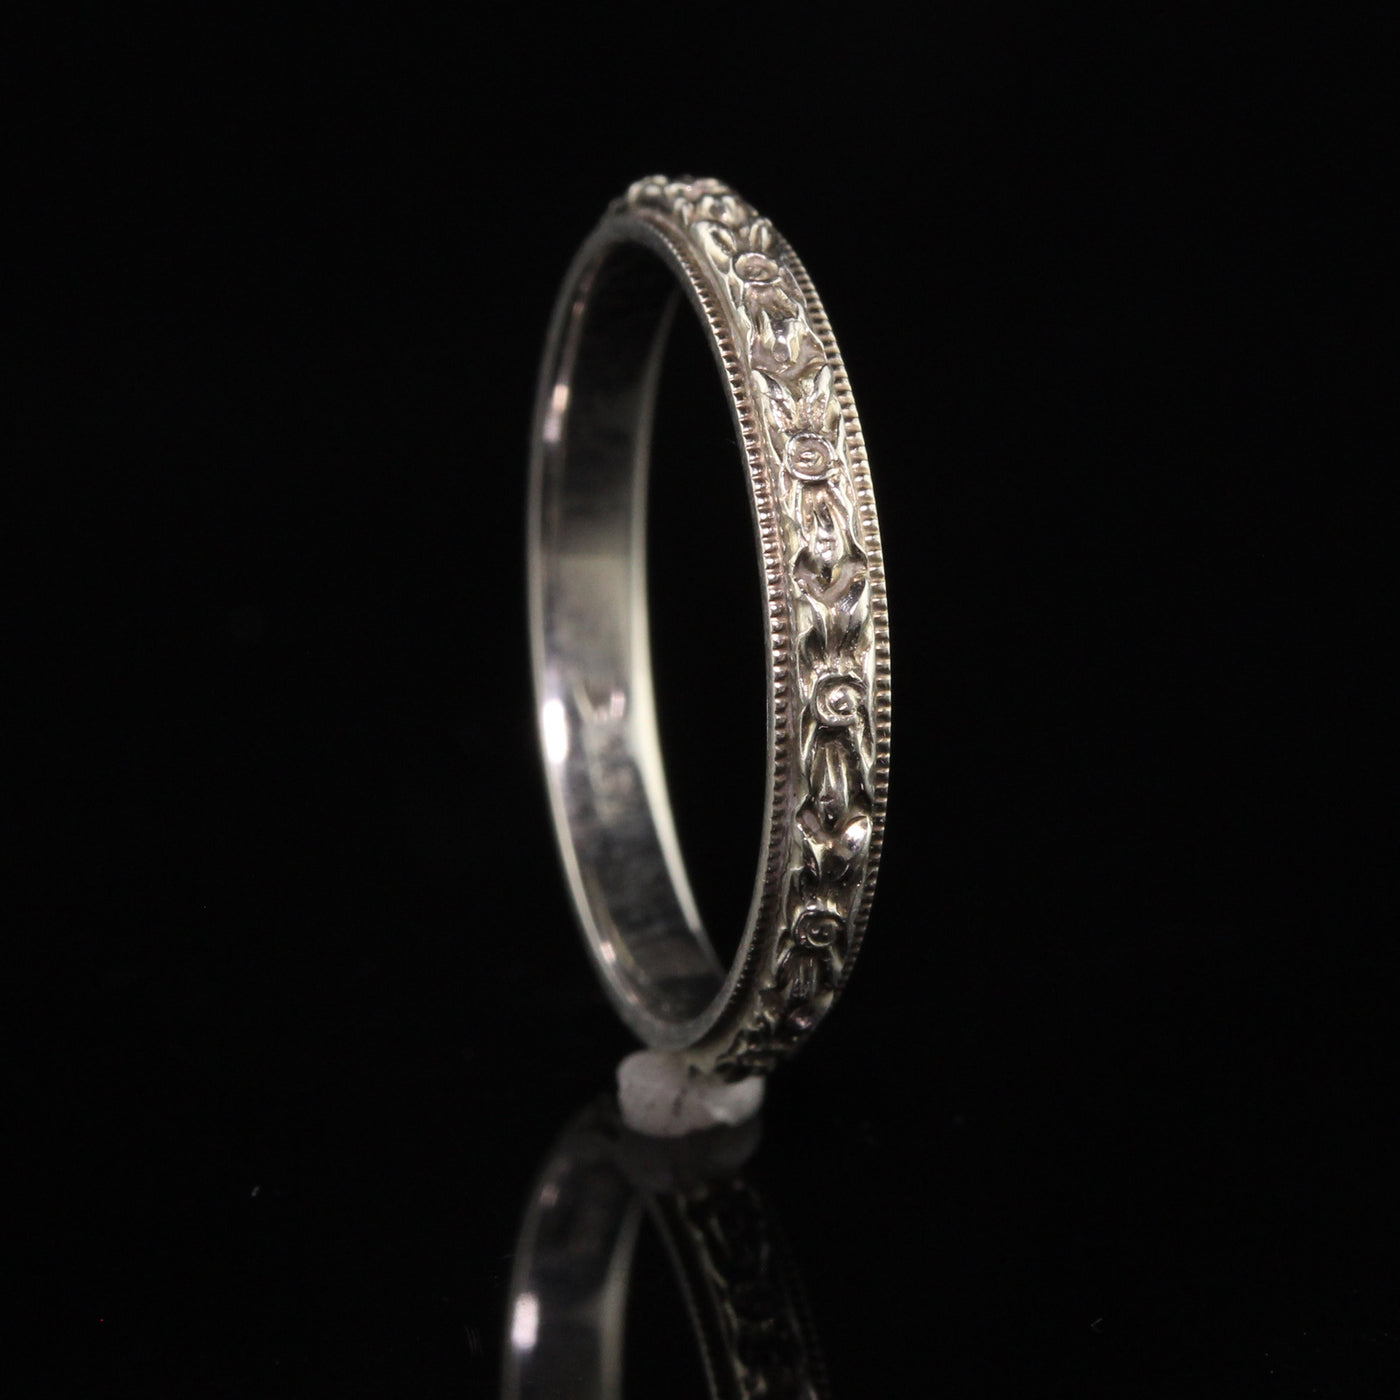 Antique Art Deco Wood and Sons 18K White Gold Engraved Blossom Wedding Band